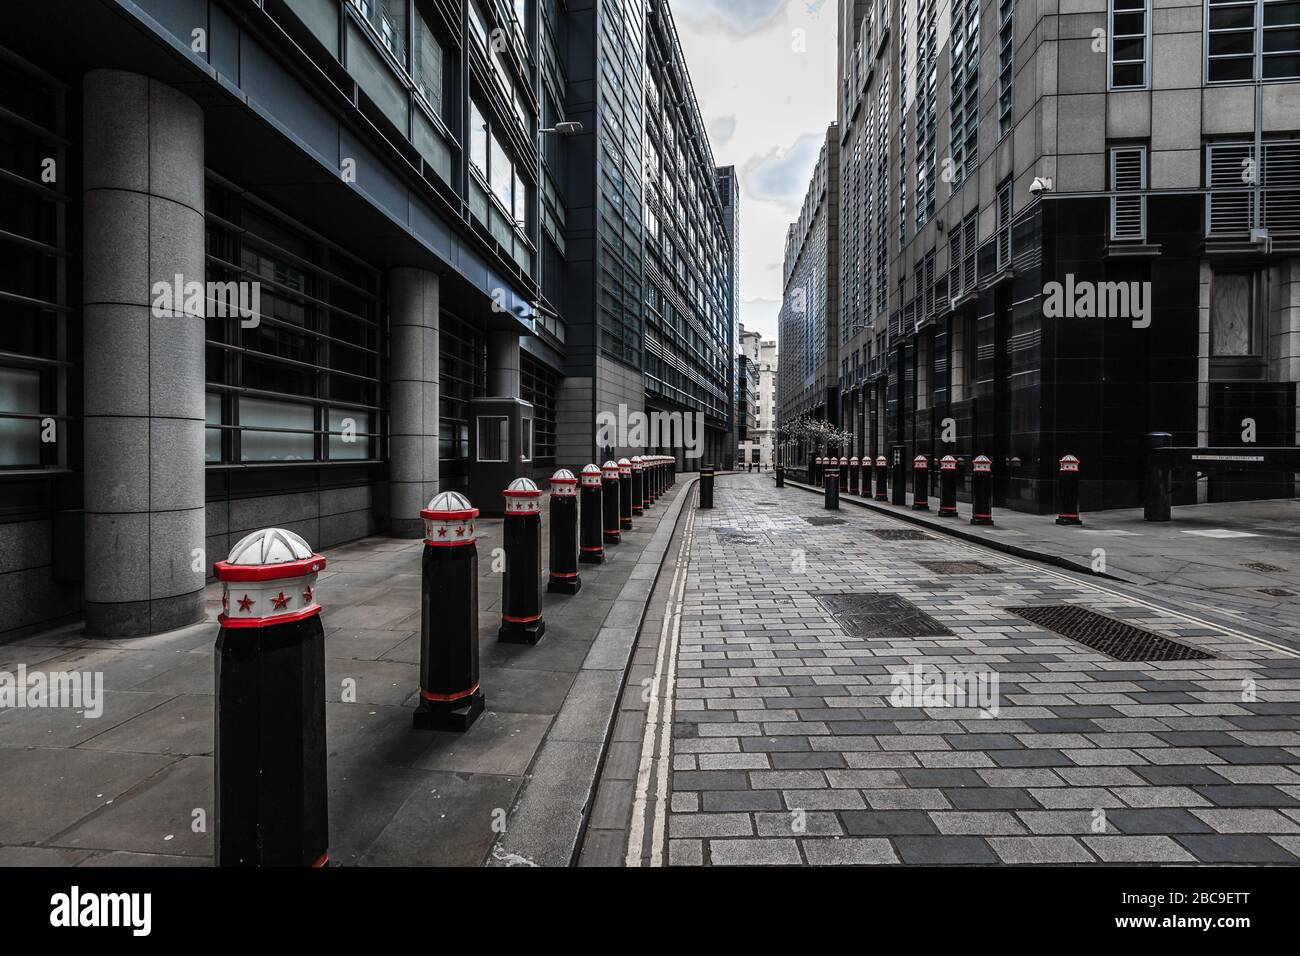 A ghost town in a deserted street in the city of London during the coronavirus pandemic health crisis in UK. Stock Photo